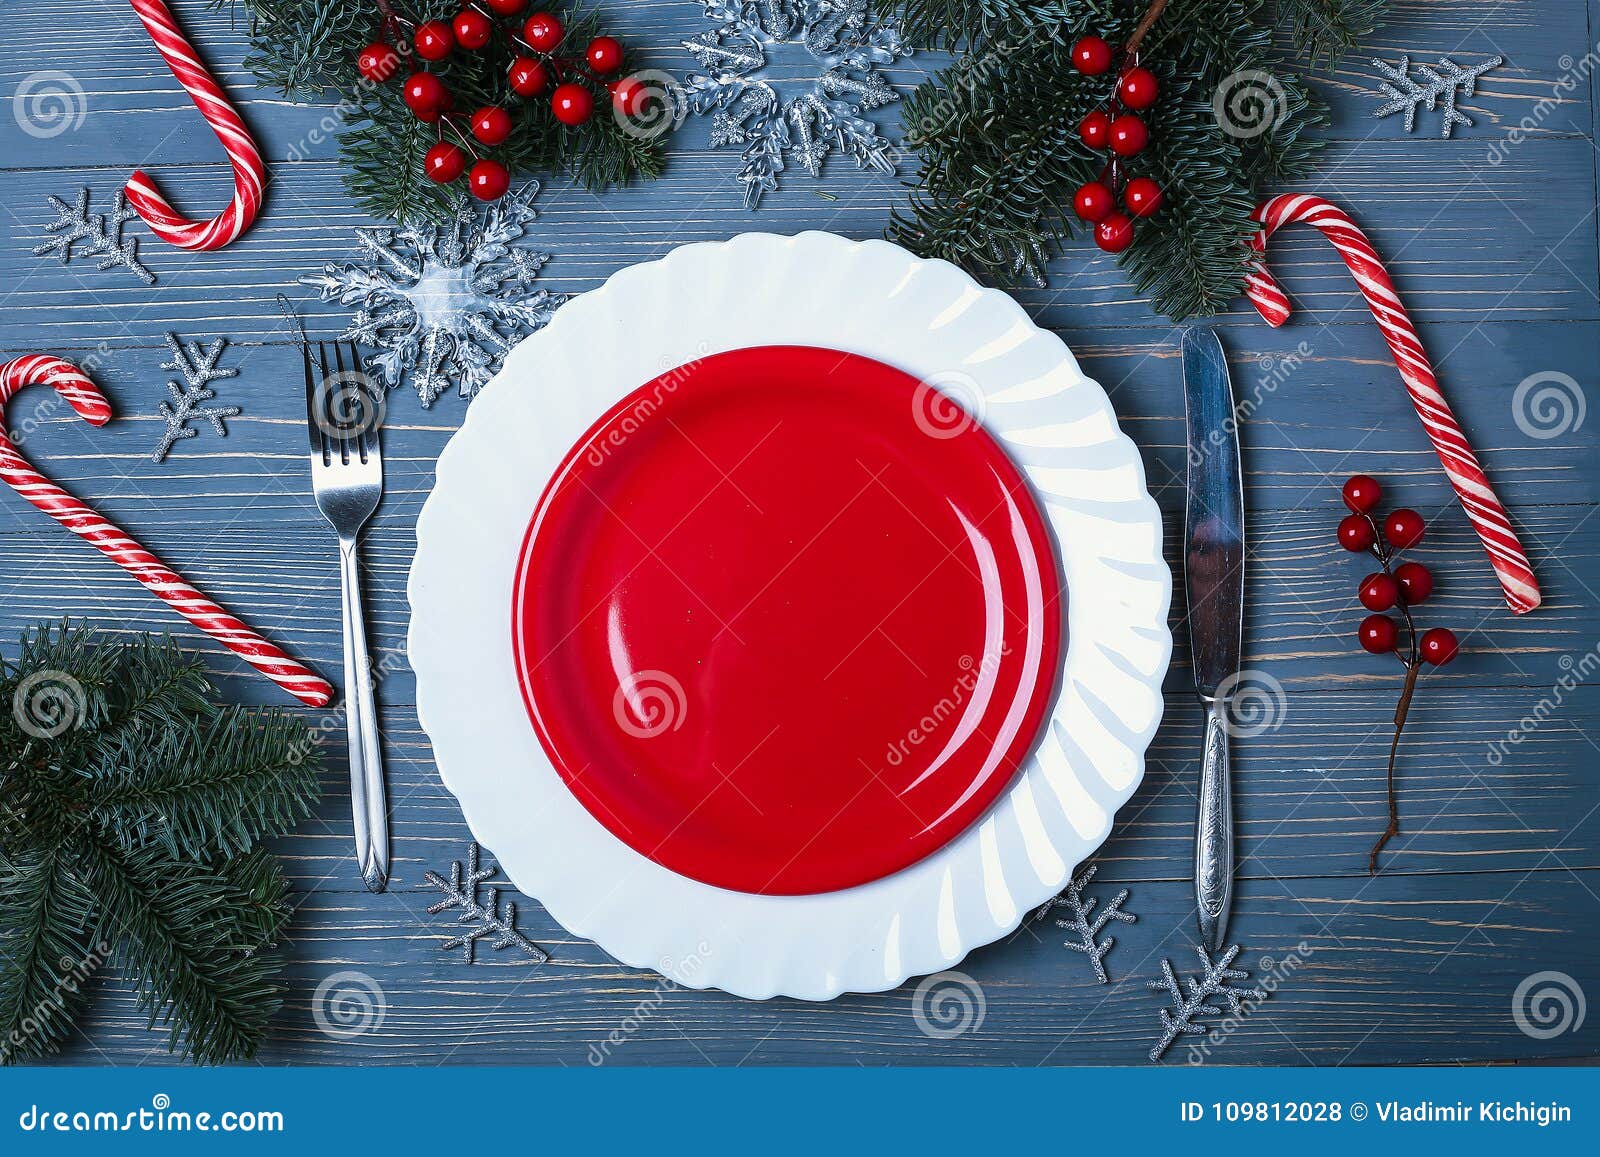 Plates and Dishes for the Christmas Table. Festive Table Setting Stock ...